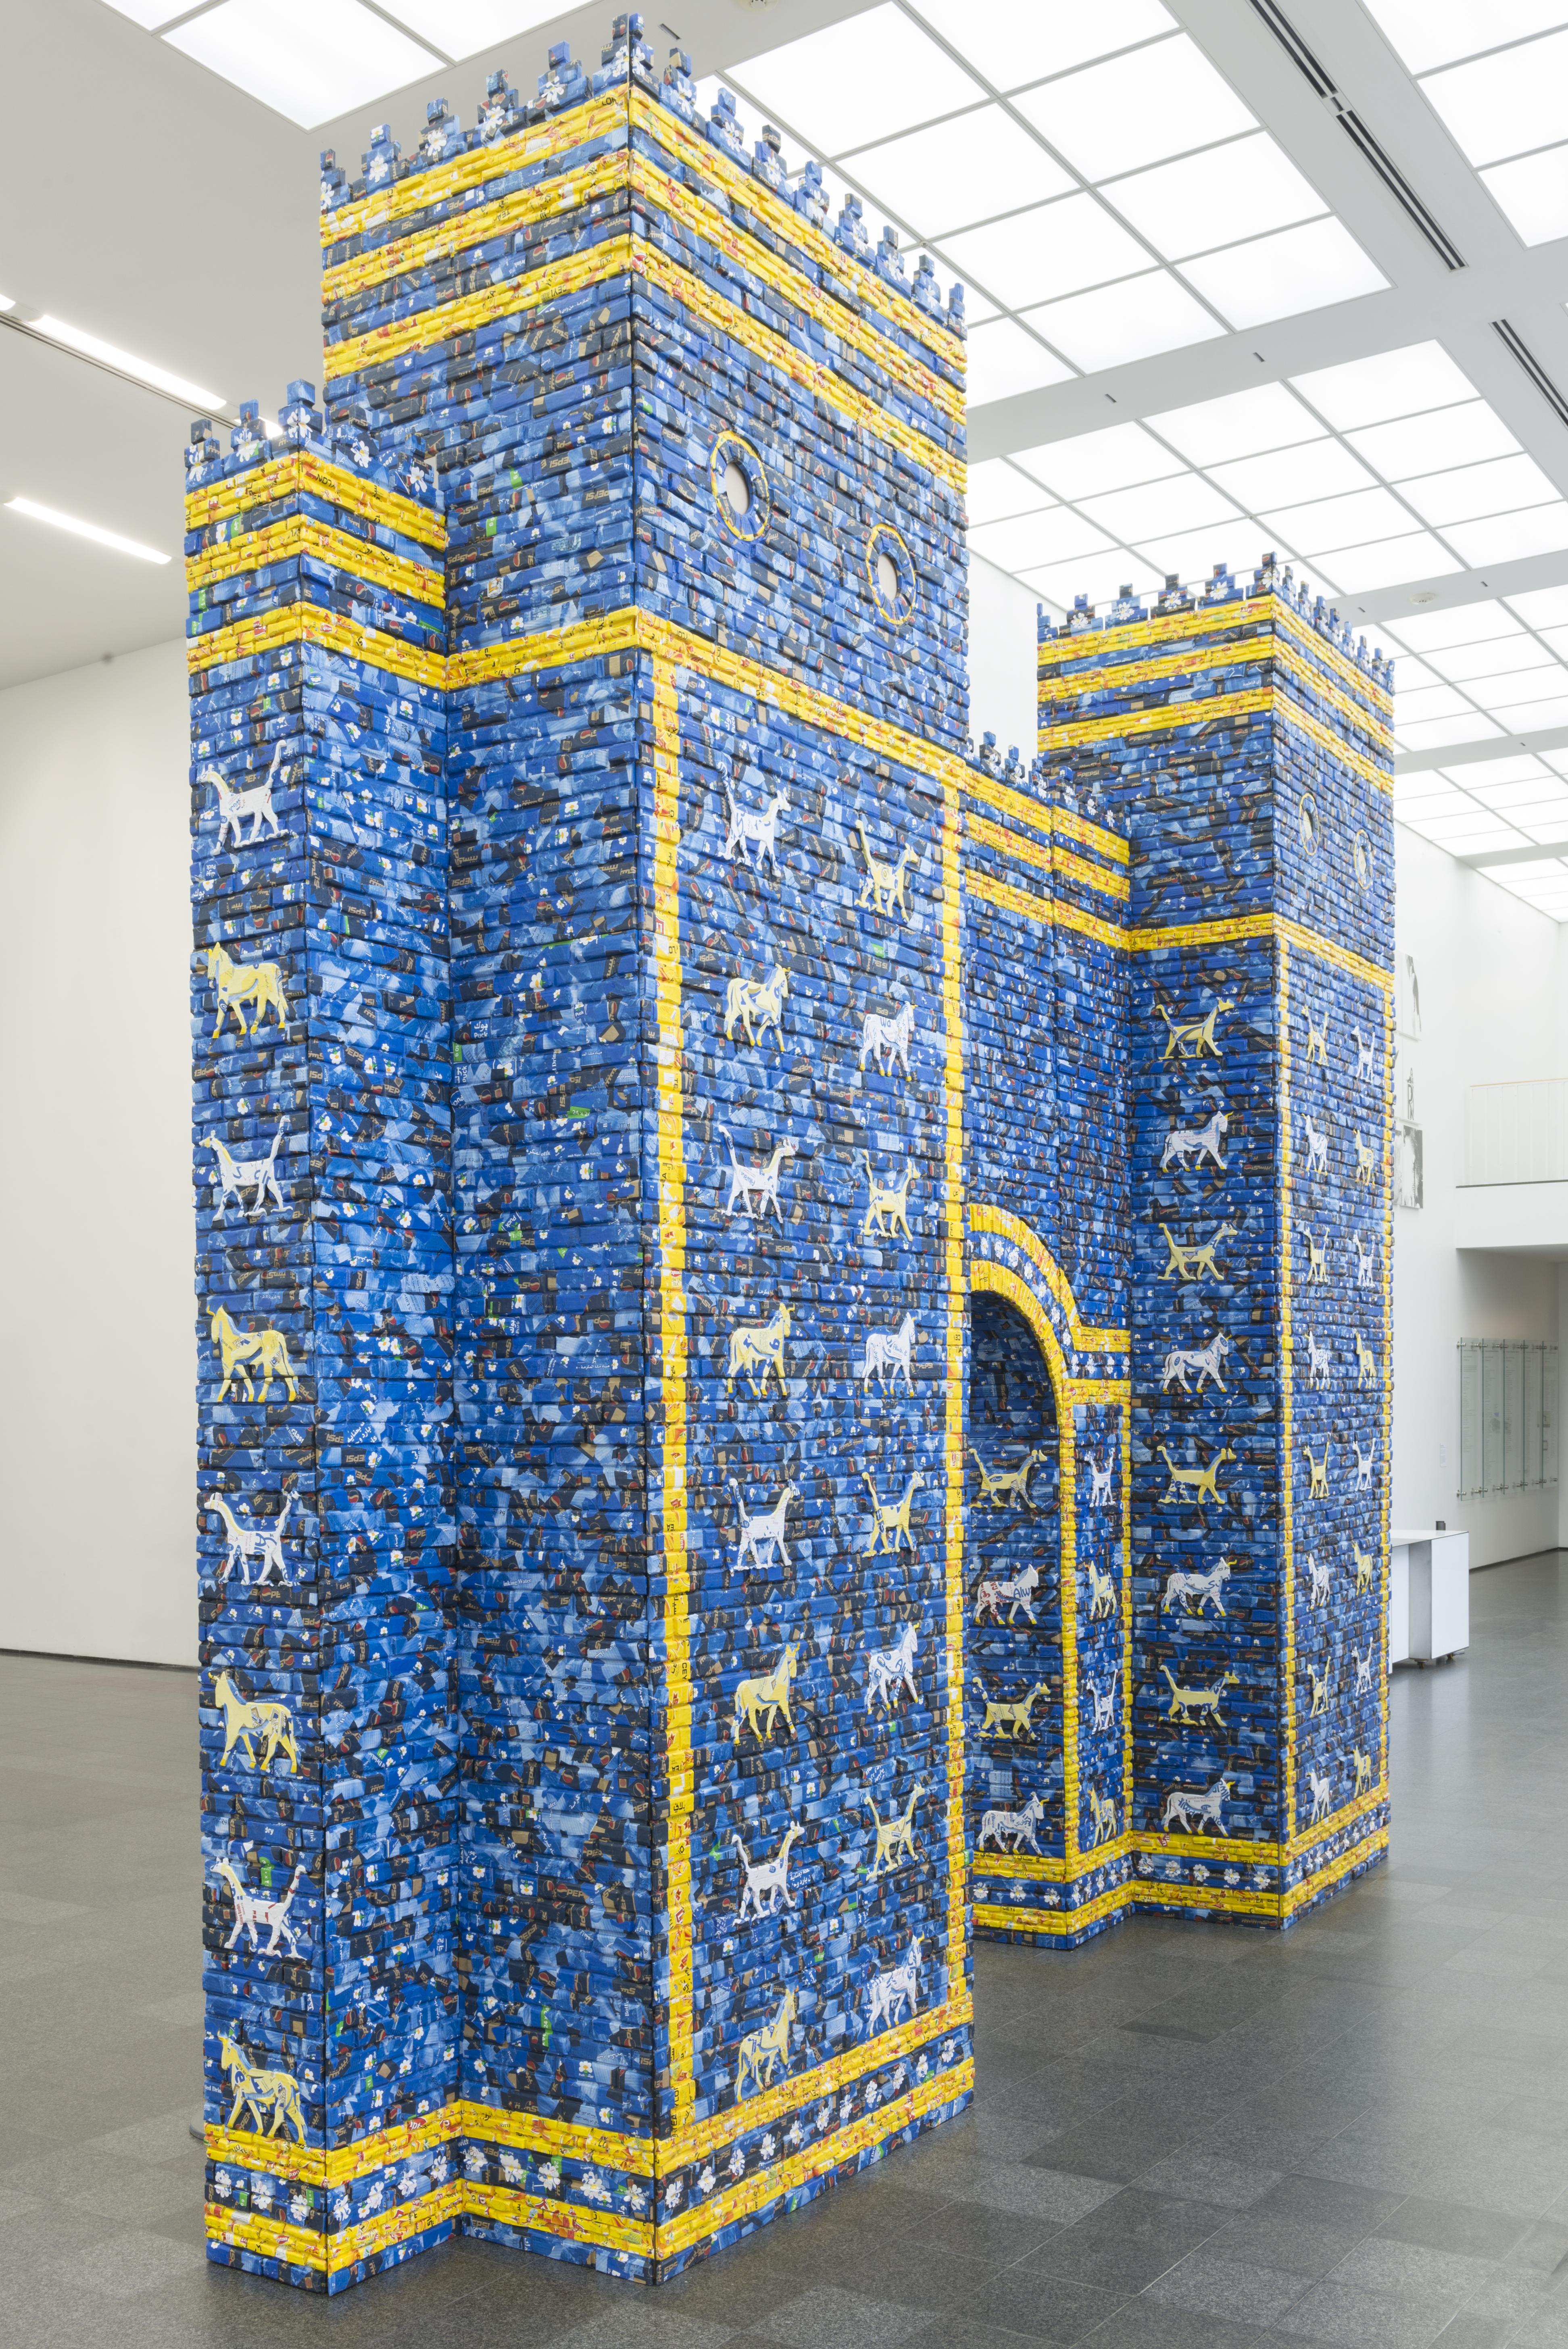 A blue and yellow castle-like structure stands in the MCA atrium